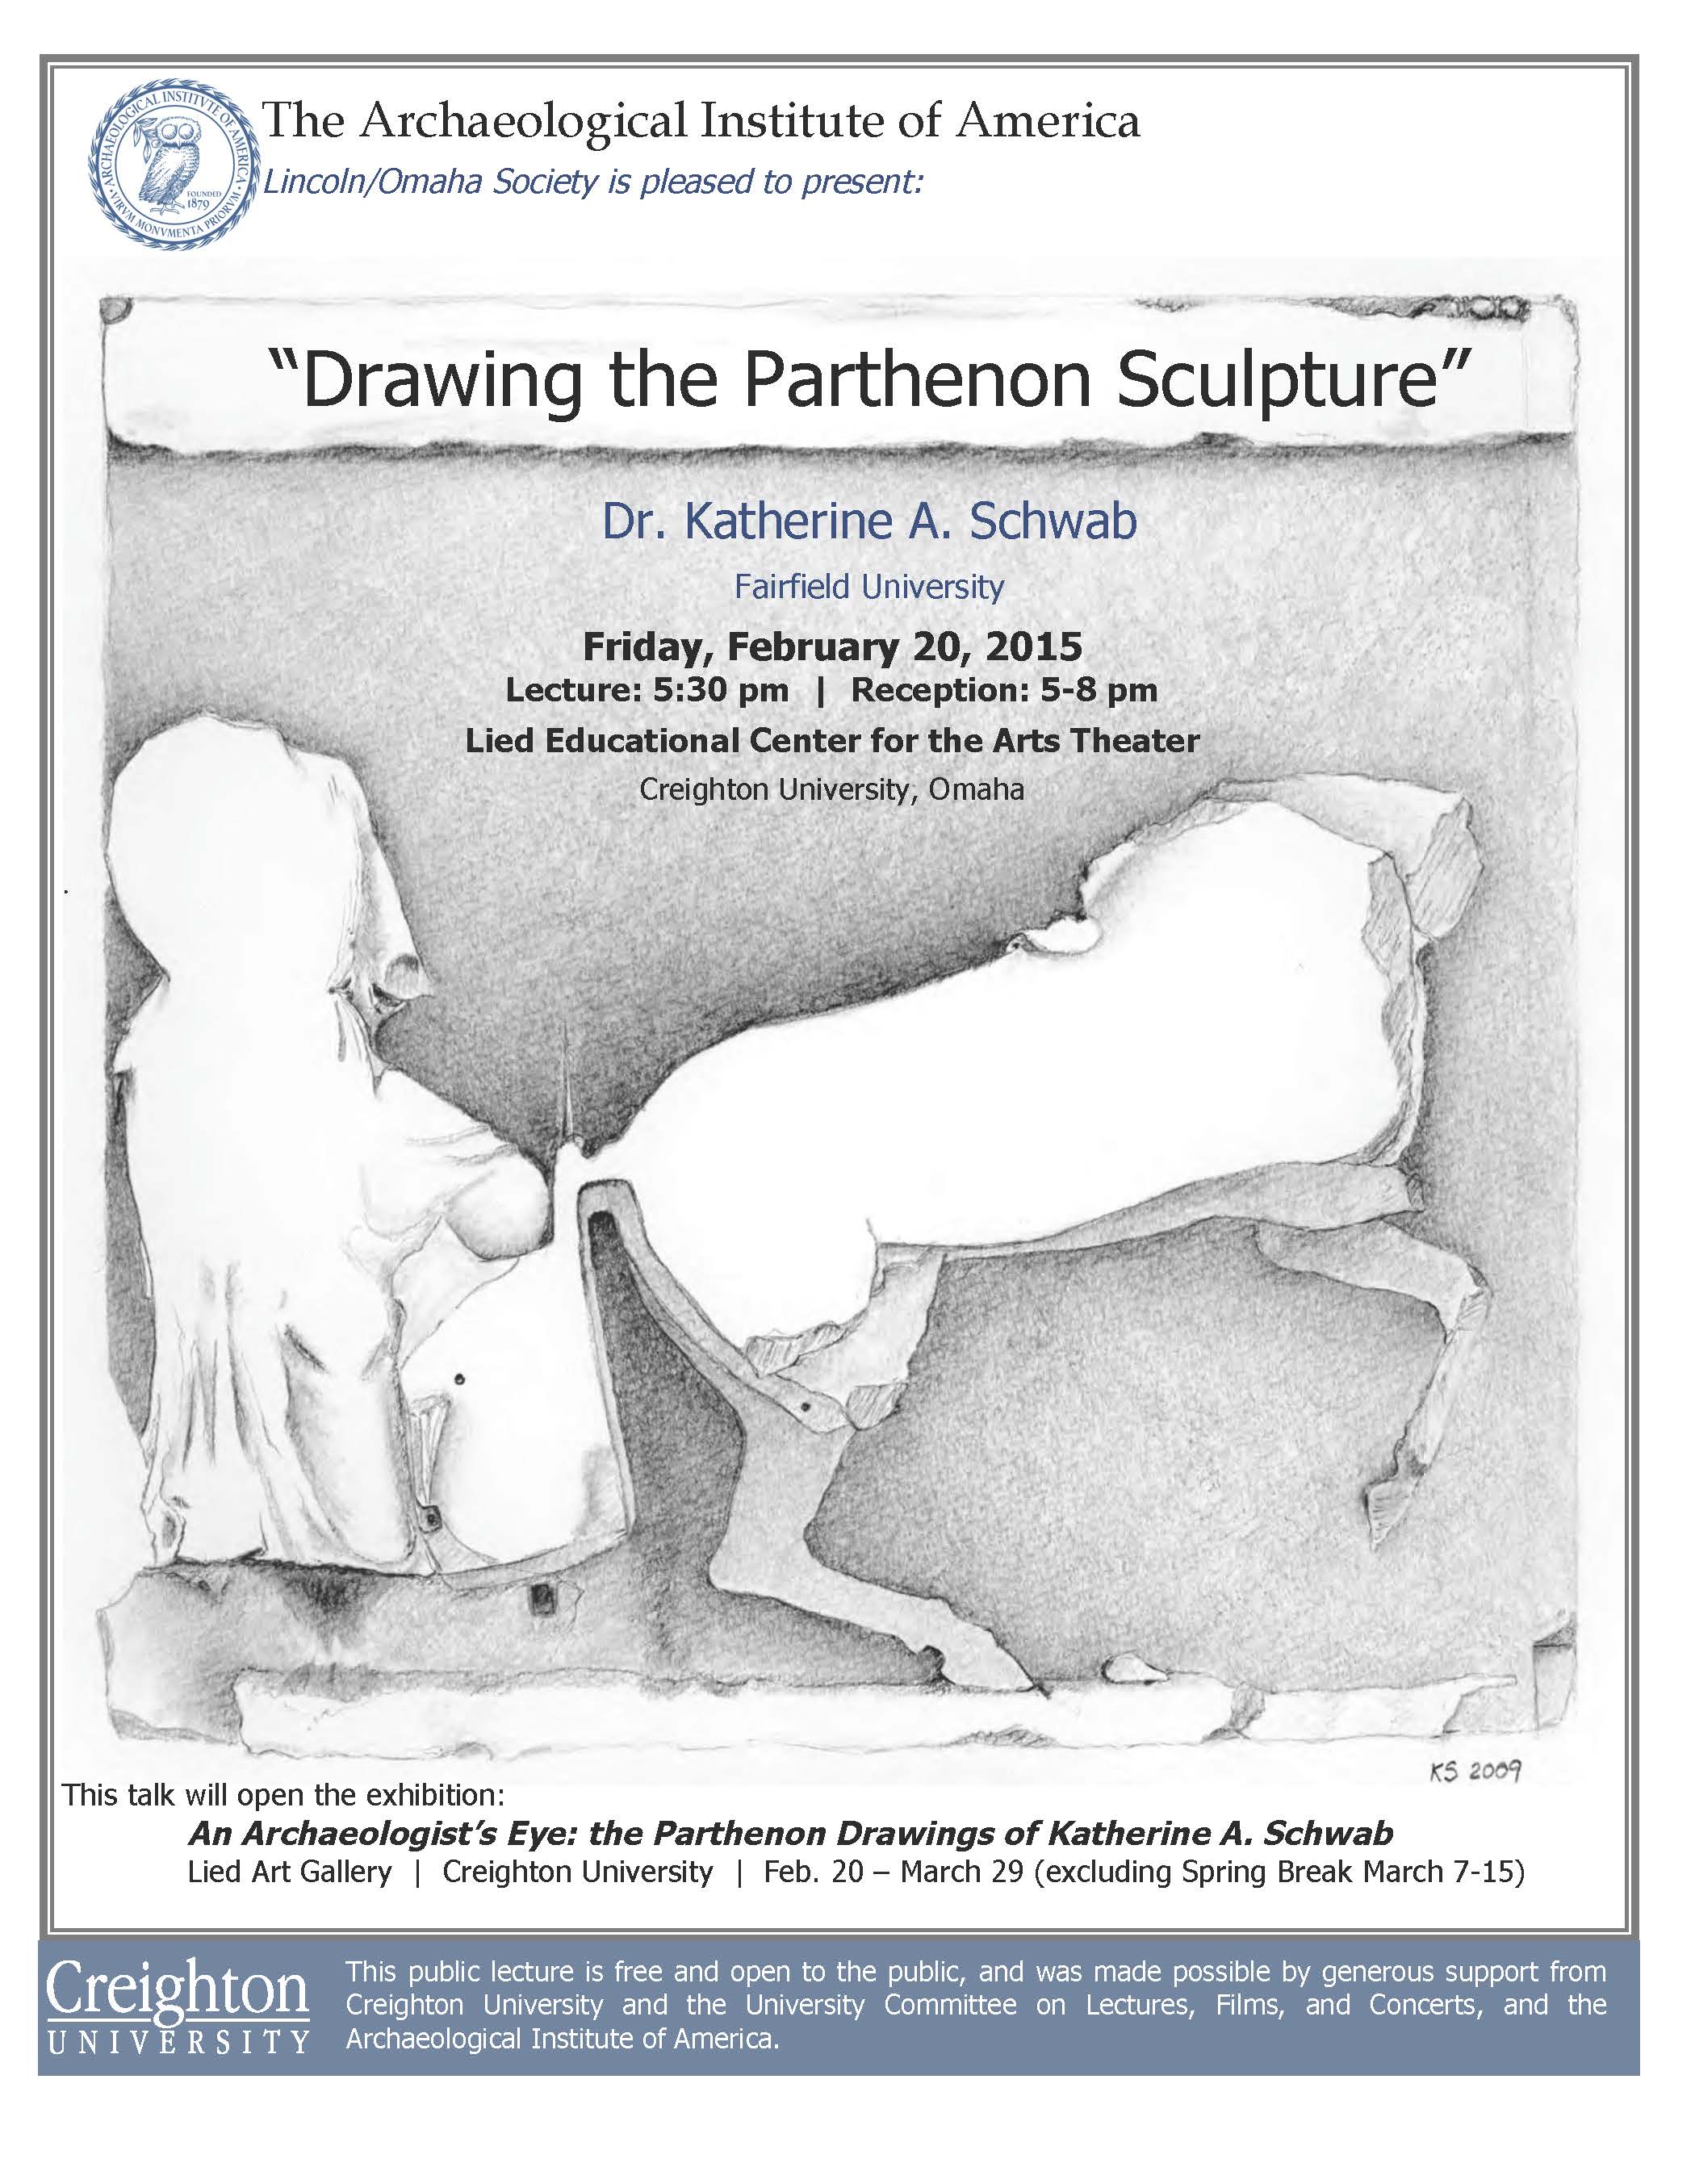 "Drawing the Parthenon Sculpture"